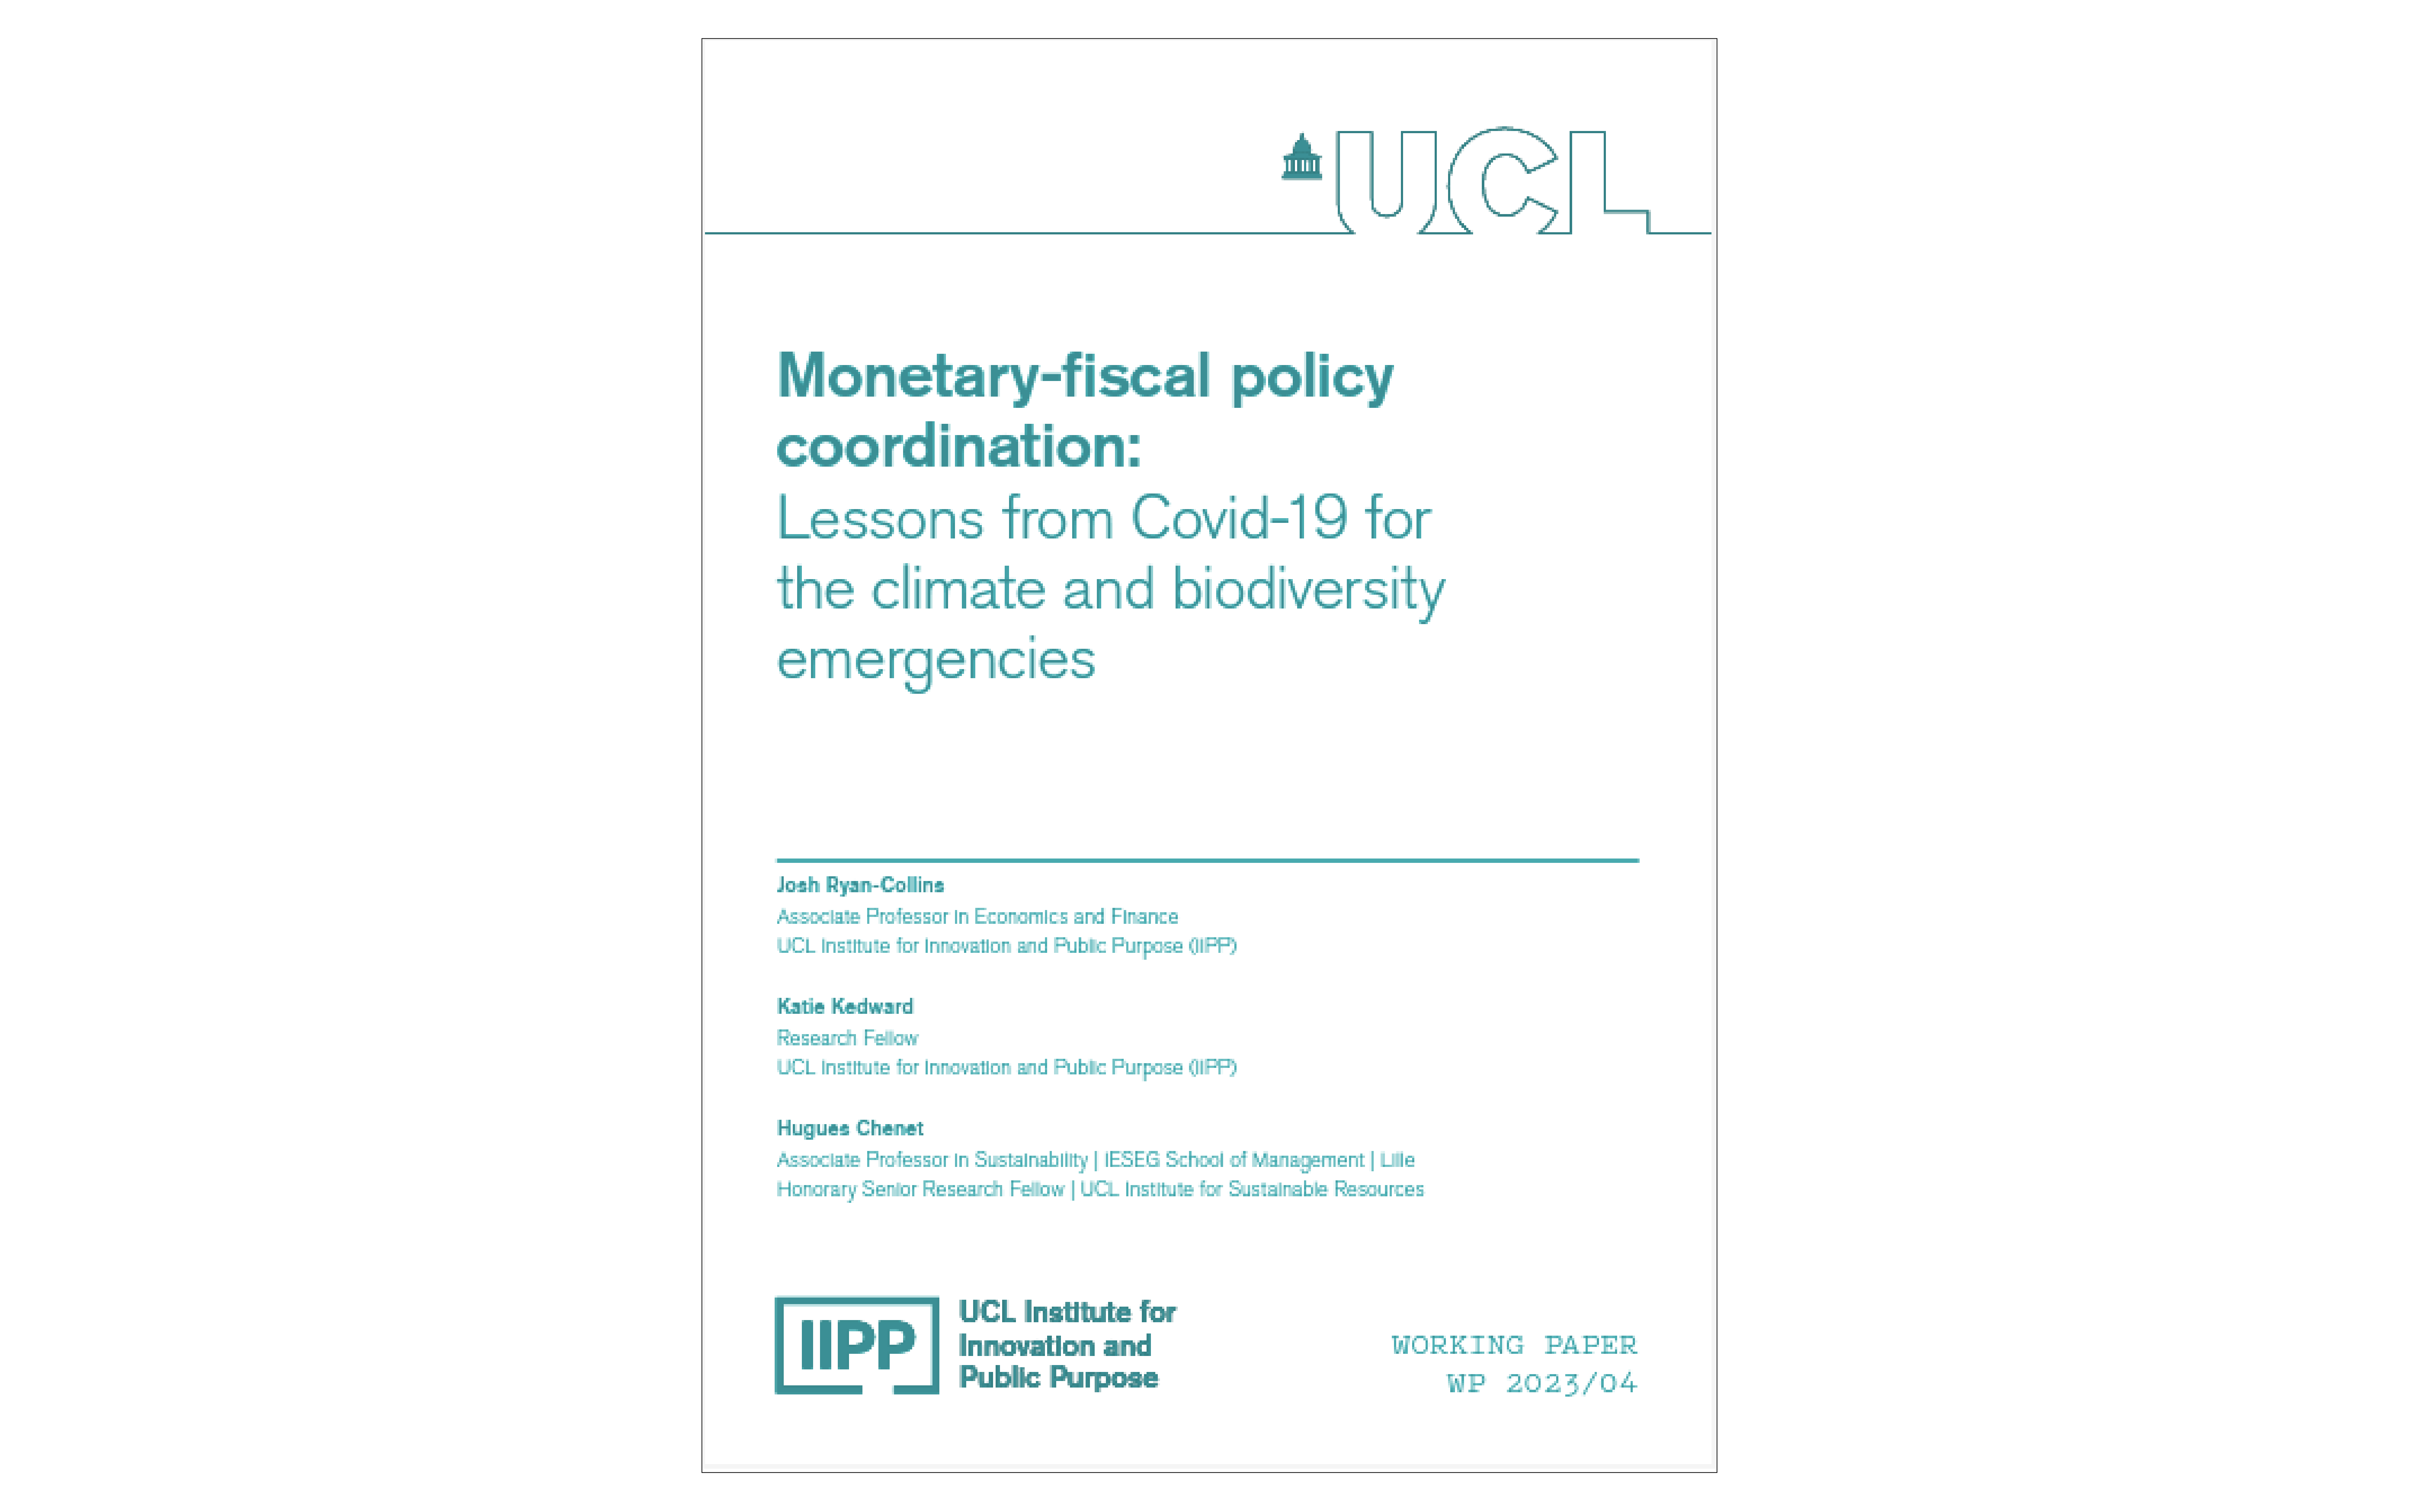 Monetary-fiscal policy coordination: Lessons from Covid for the climate & biodiversity emergencies